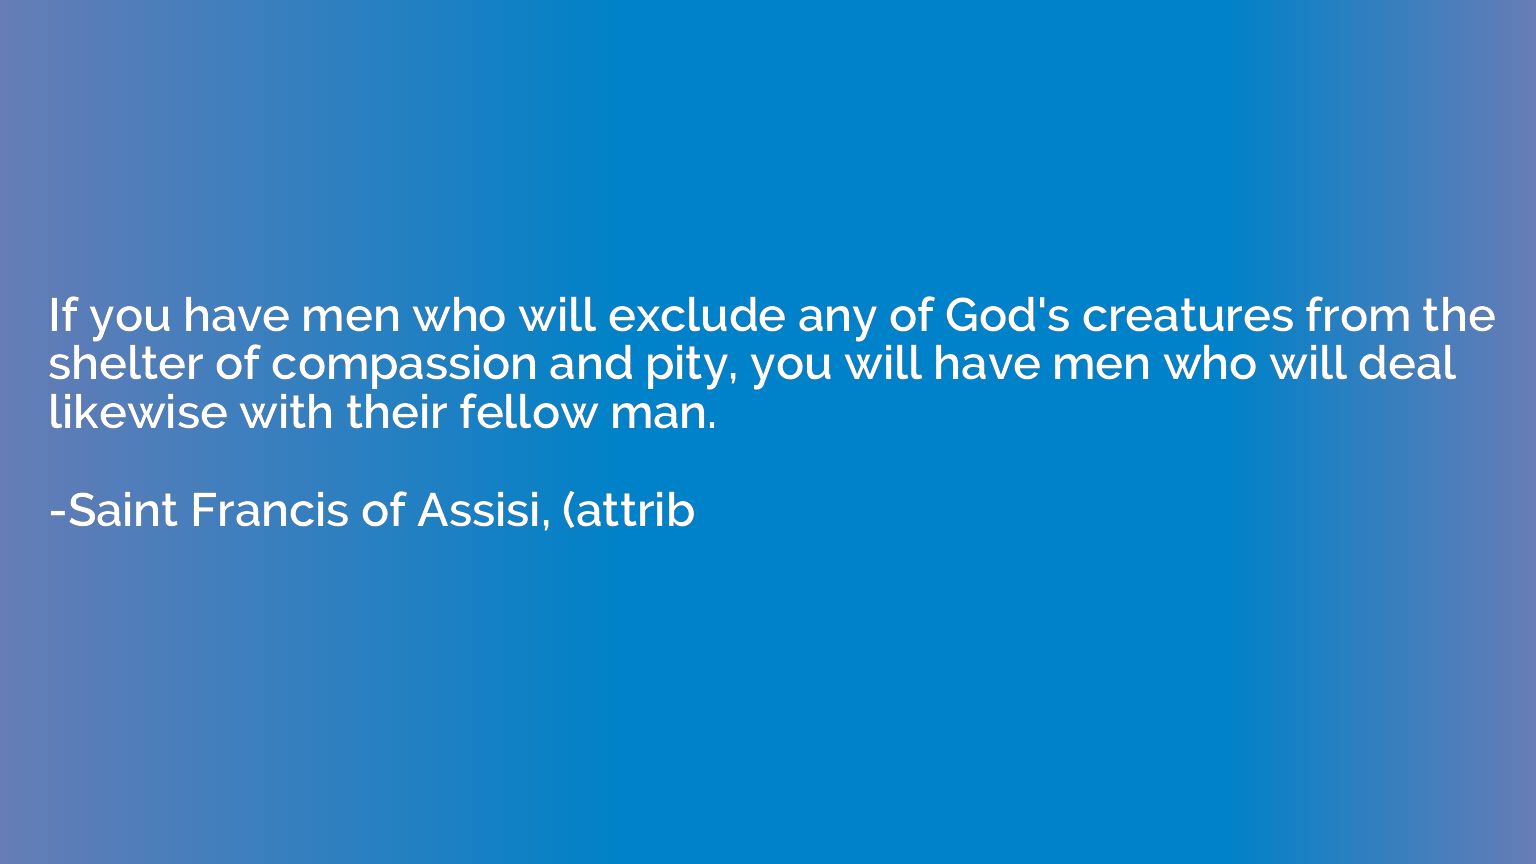 If you have men who will exclude any of God's creatures from